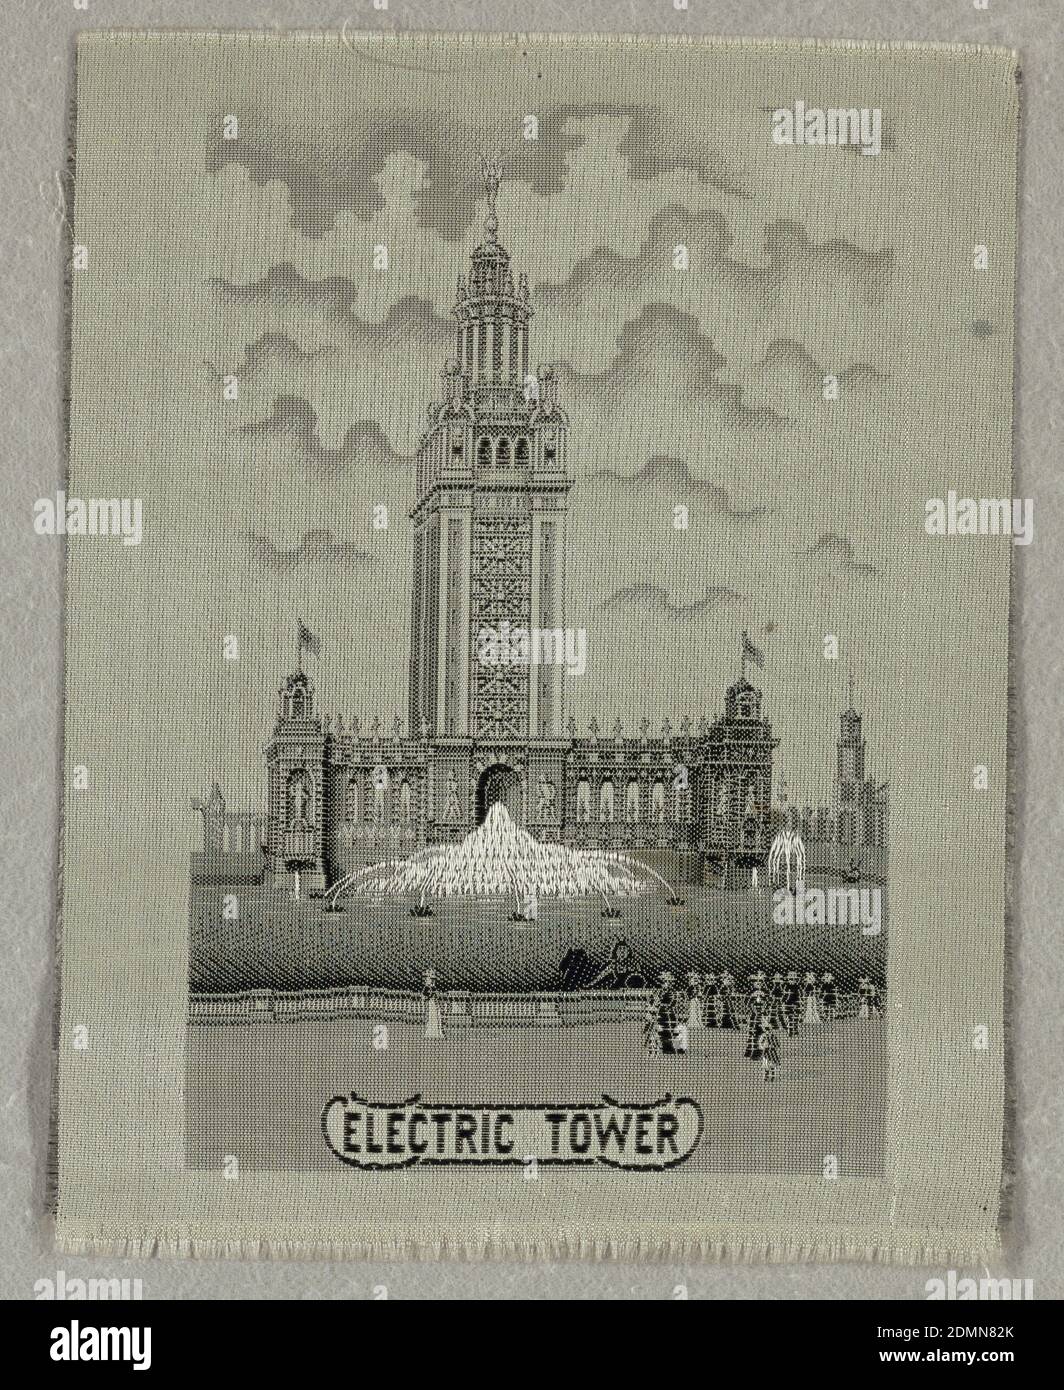 Commemorative picture, Medium: silk Technique: jacquard woven, Souvenir of World's Columbian Exposition at Buffalo, New York with an image of the Electric Tower., USA, ca. 1901, woven textiles, Commemorative picture Stock Photo